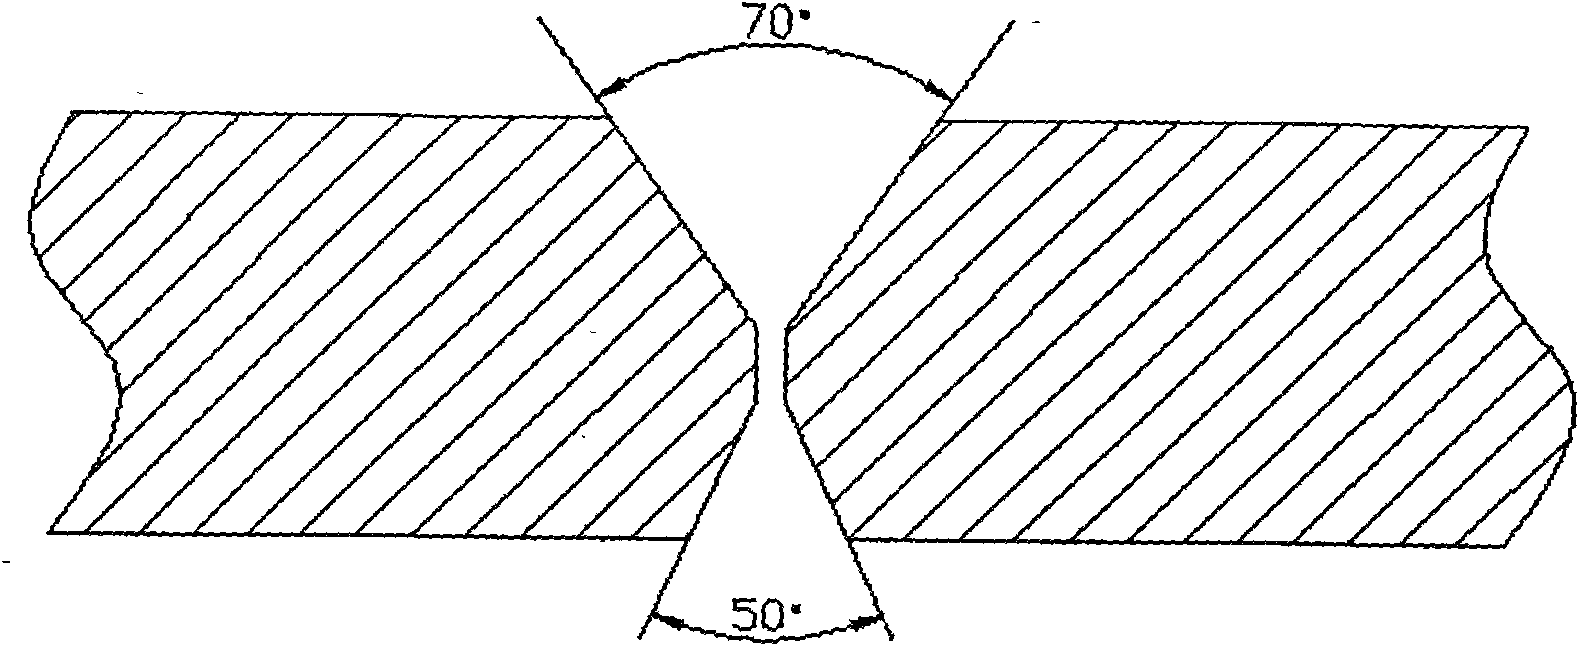 Submerged arc welding method of plank boards and jointing boards